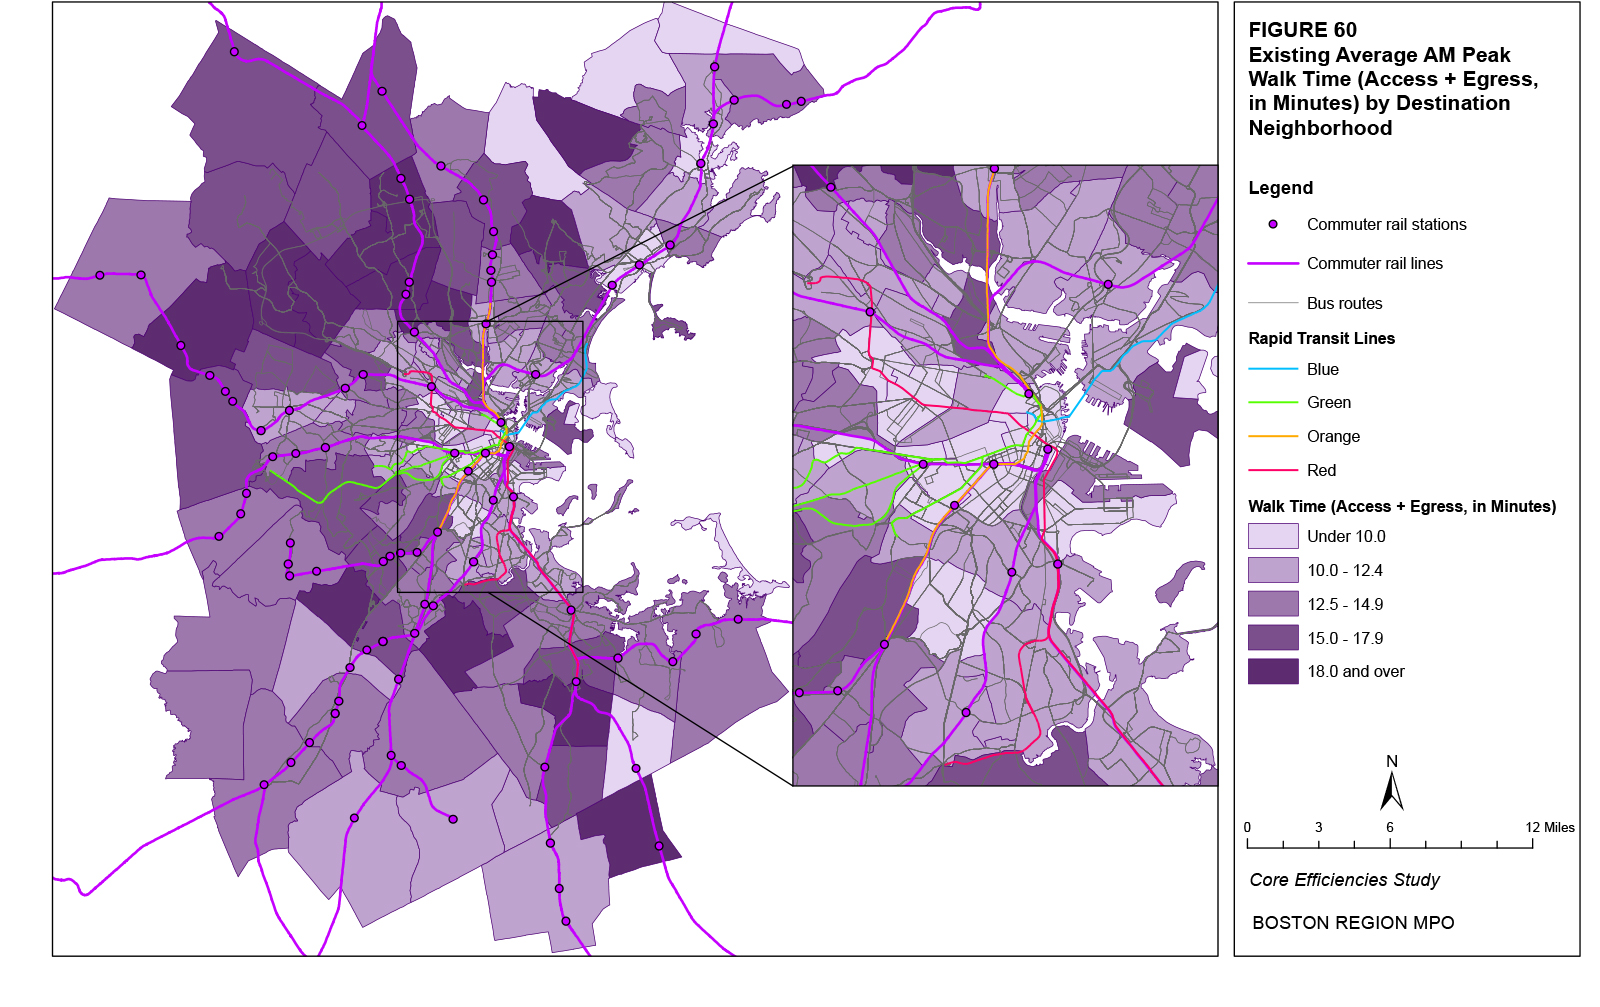 This map shows the existing average AM peak walk times for destination trips by neighborhood.